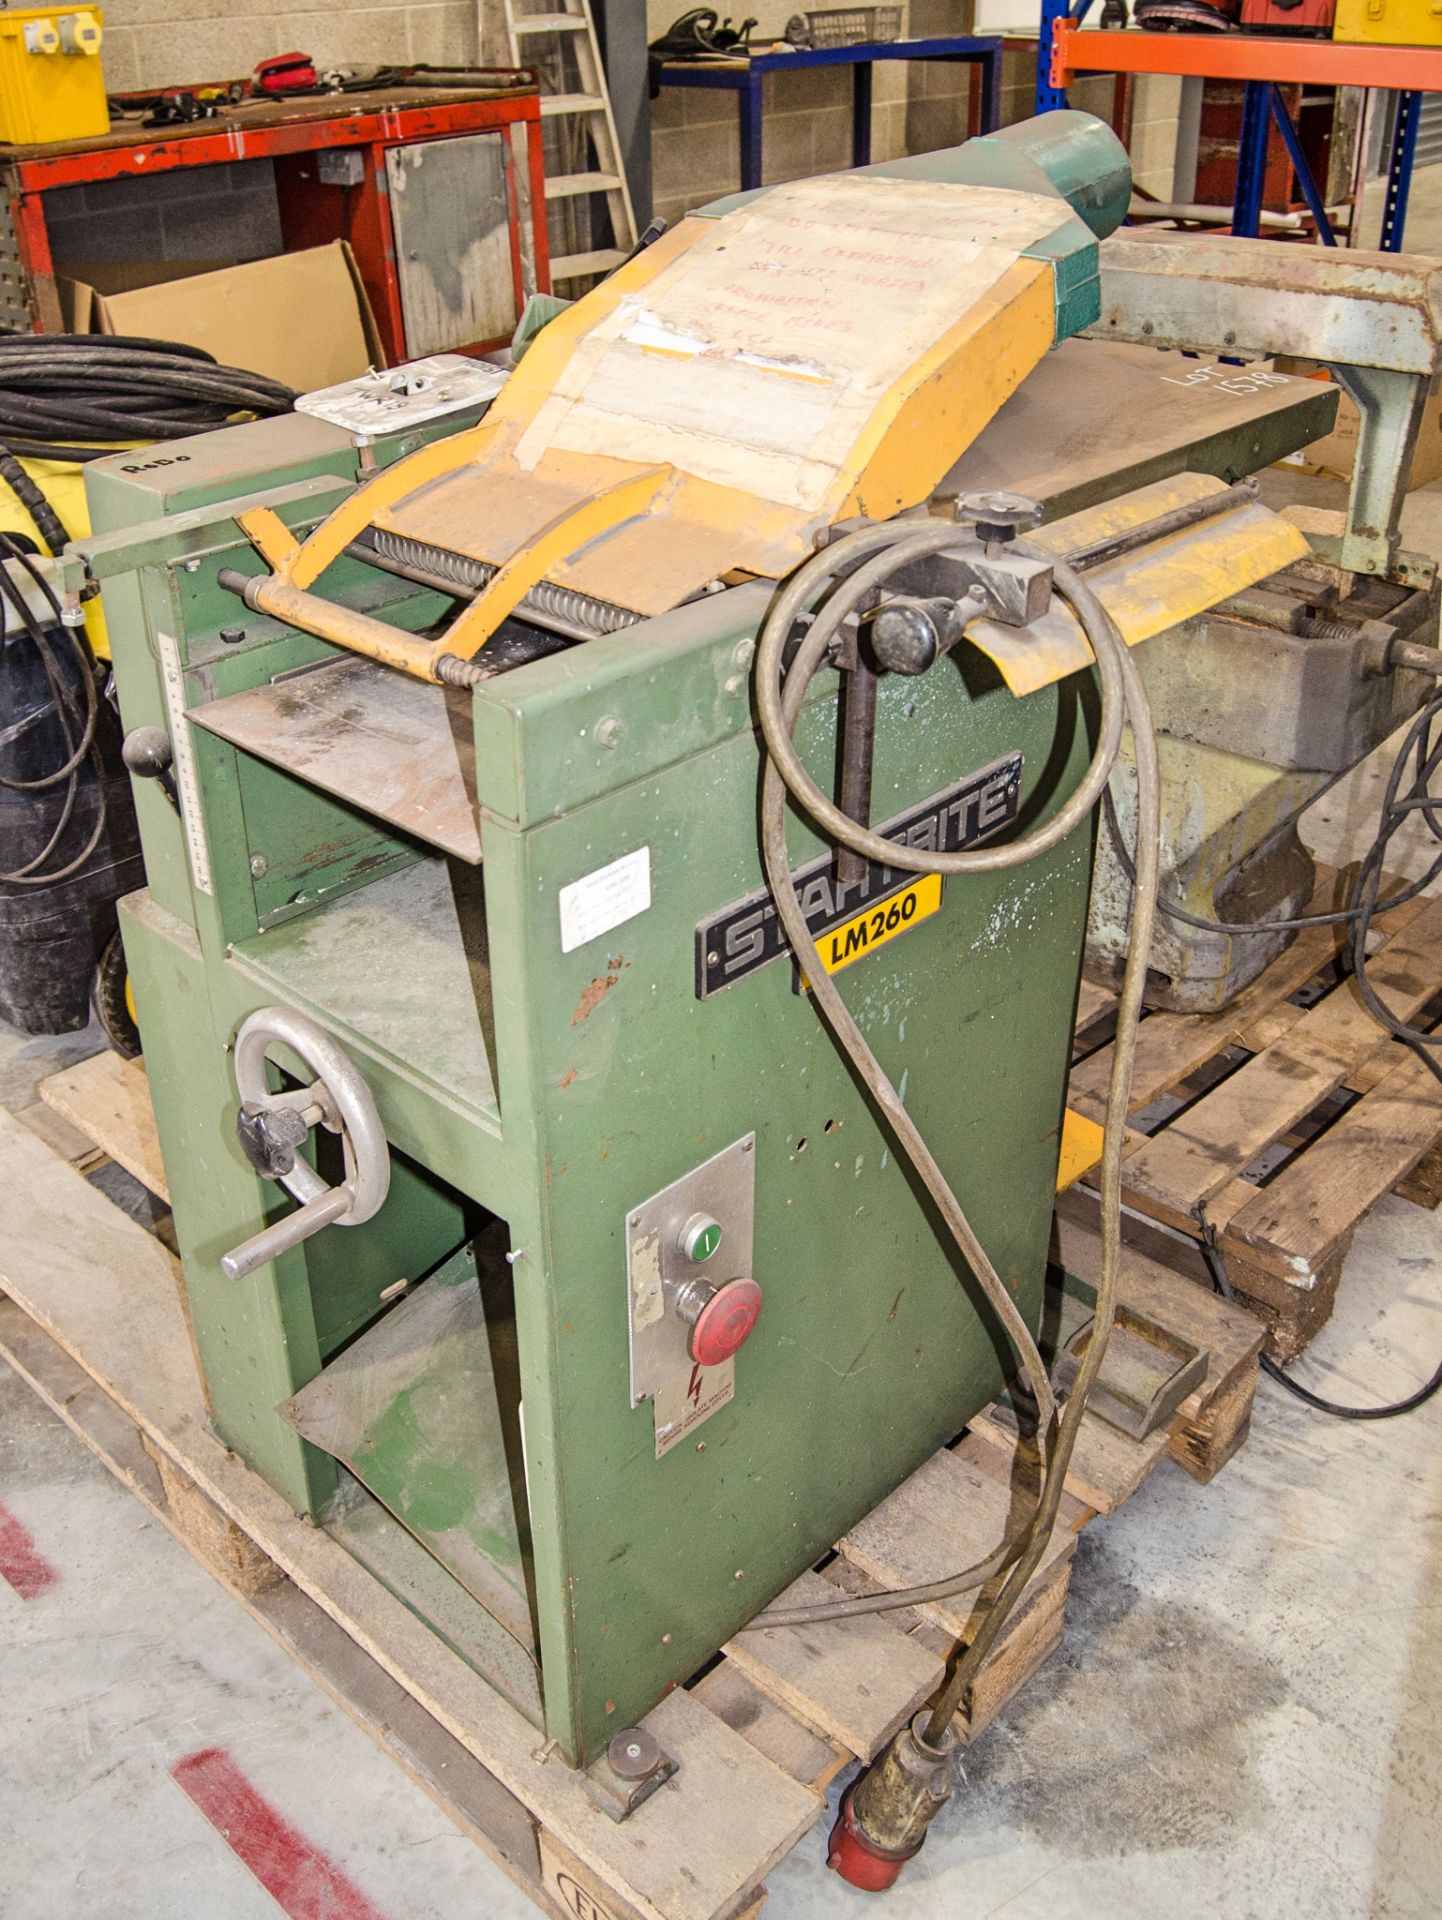 Startrite LM260 3 phase planer thicknesser ** No VAT on hammer price but VAT will be charged on